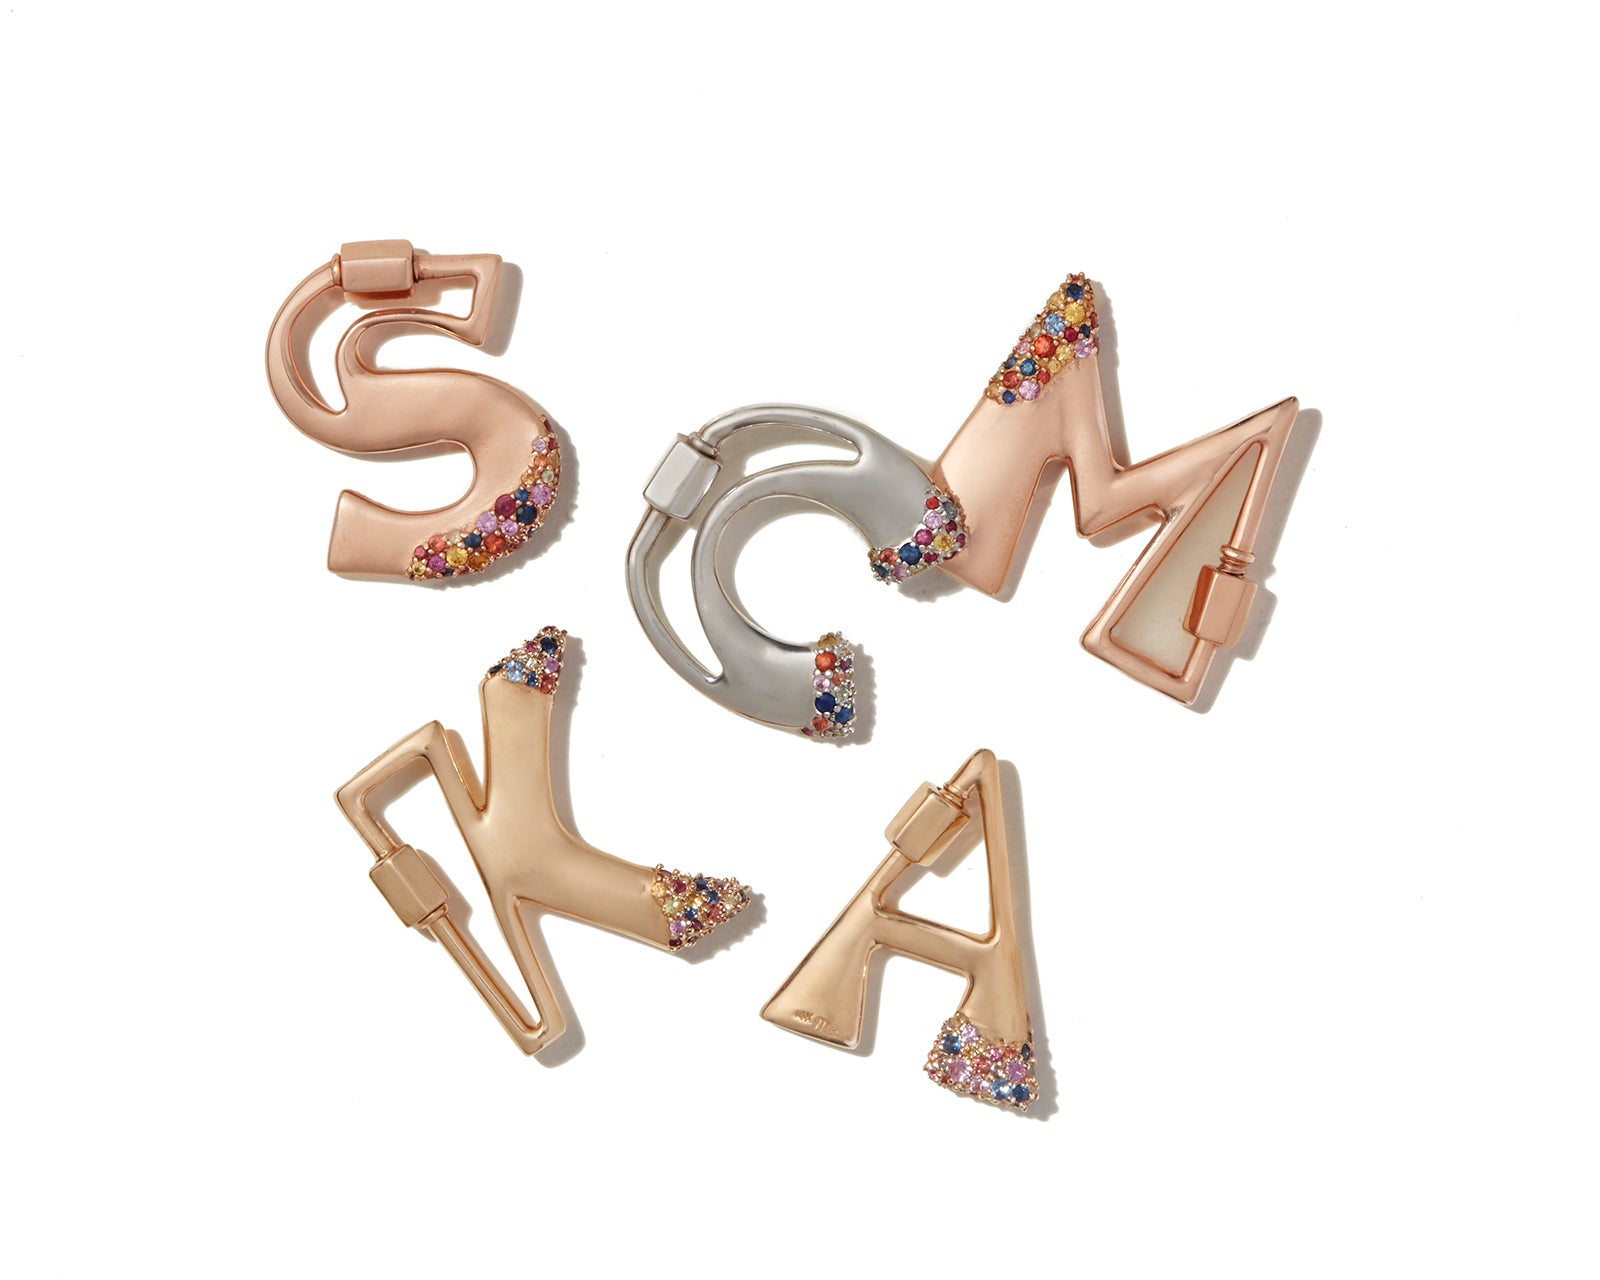 Mixed metal letter charms with colorful gemstones against white backdrop